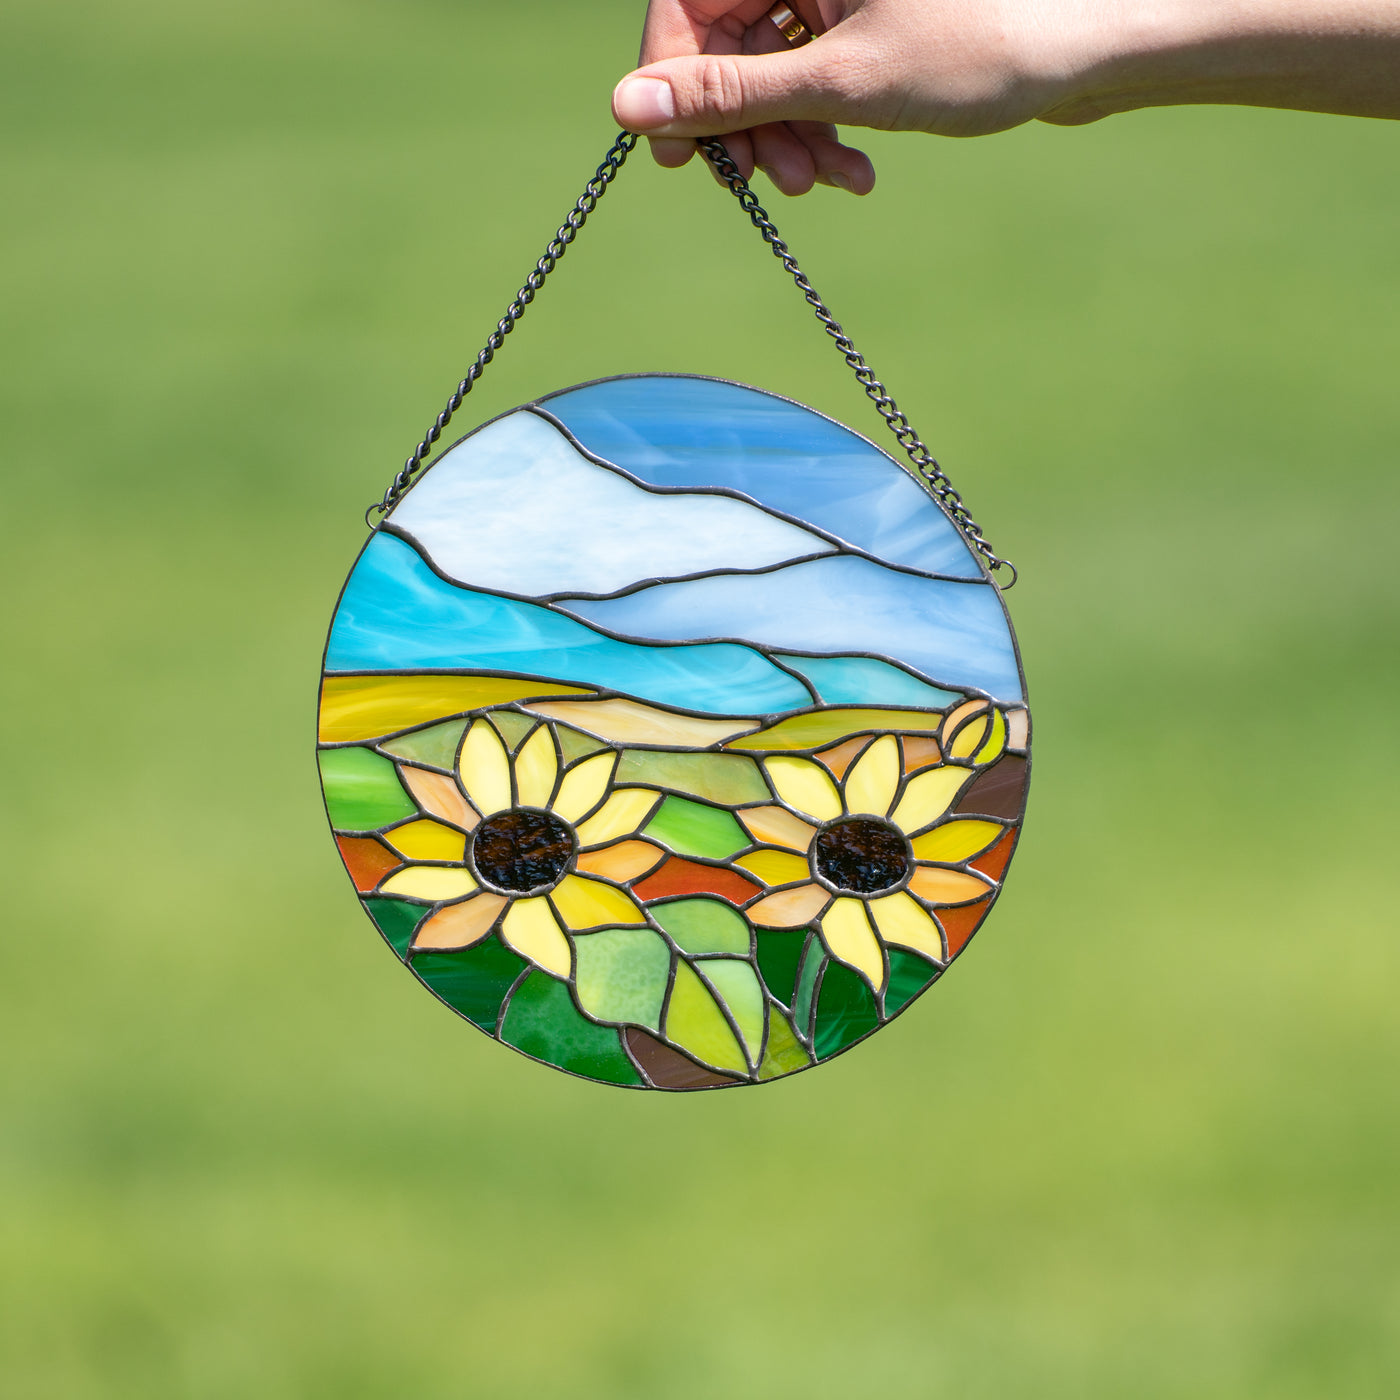 Stained glass window hanging depicting sunflowers and blue skies